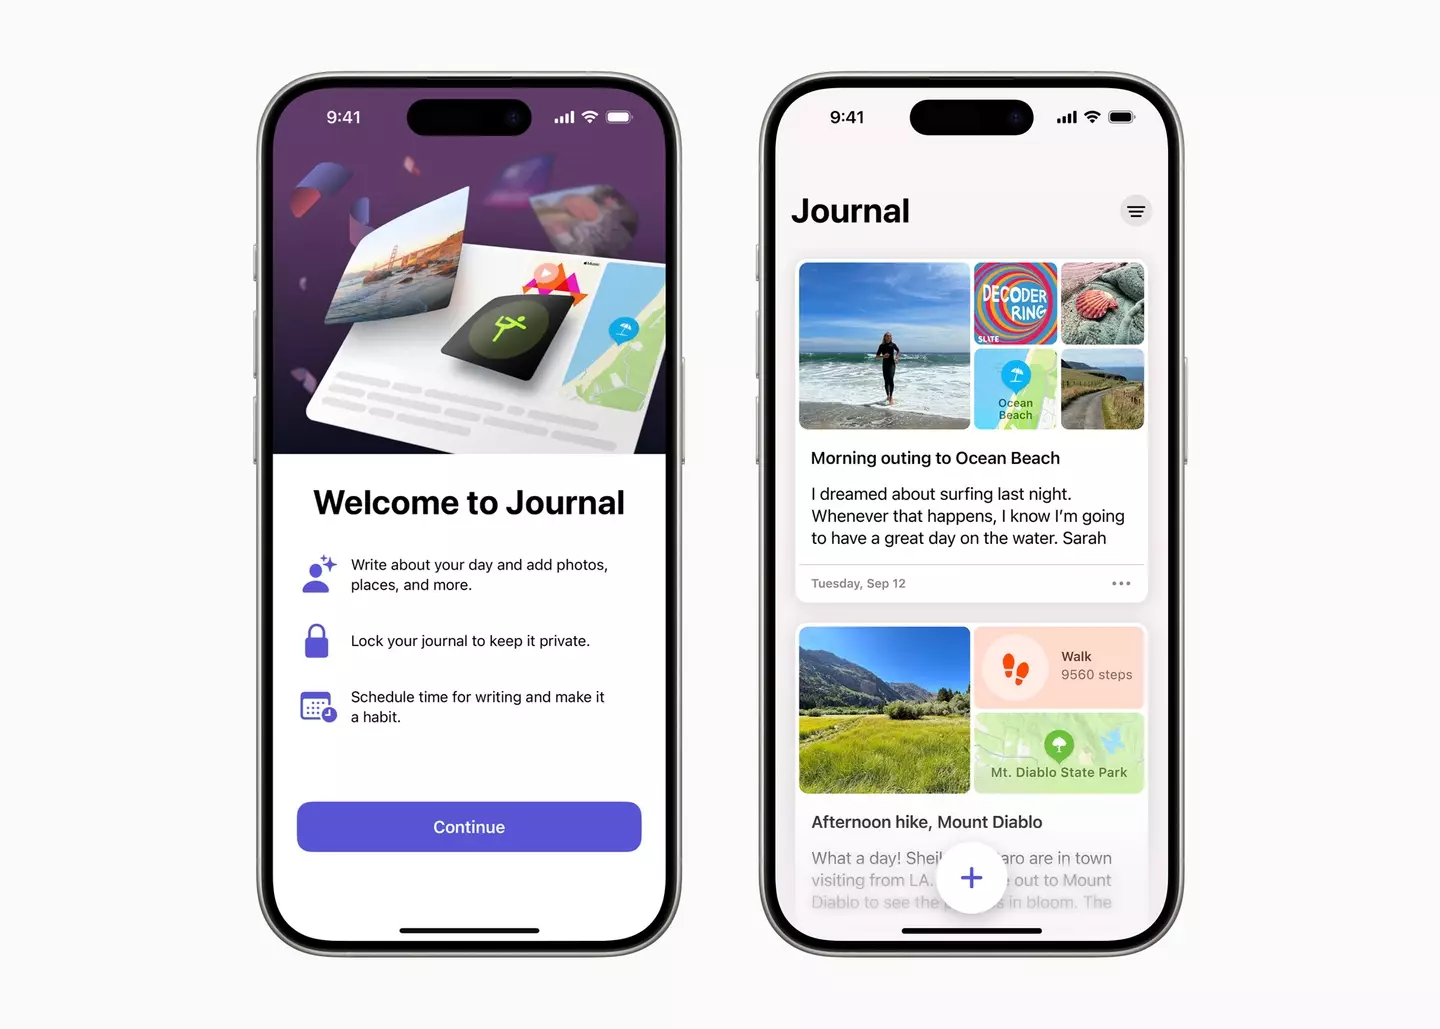 The Journal app is in the new update.